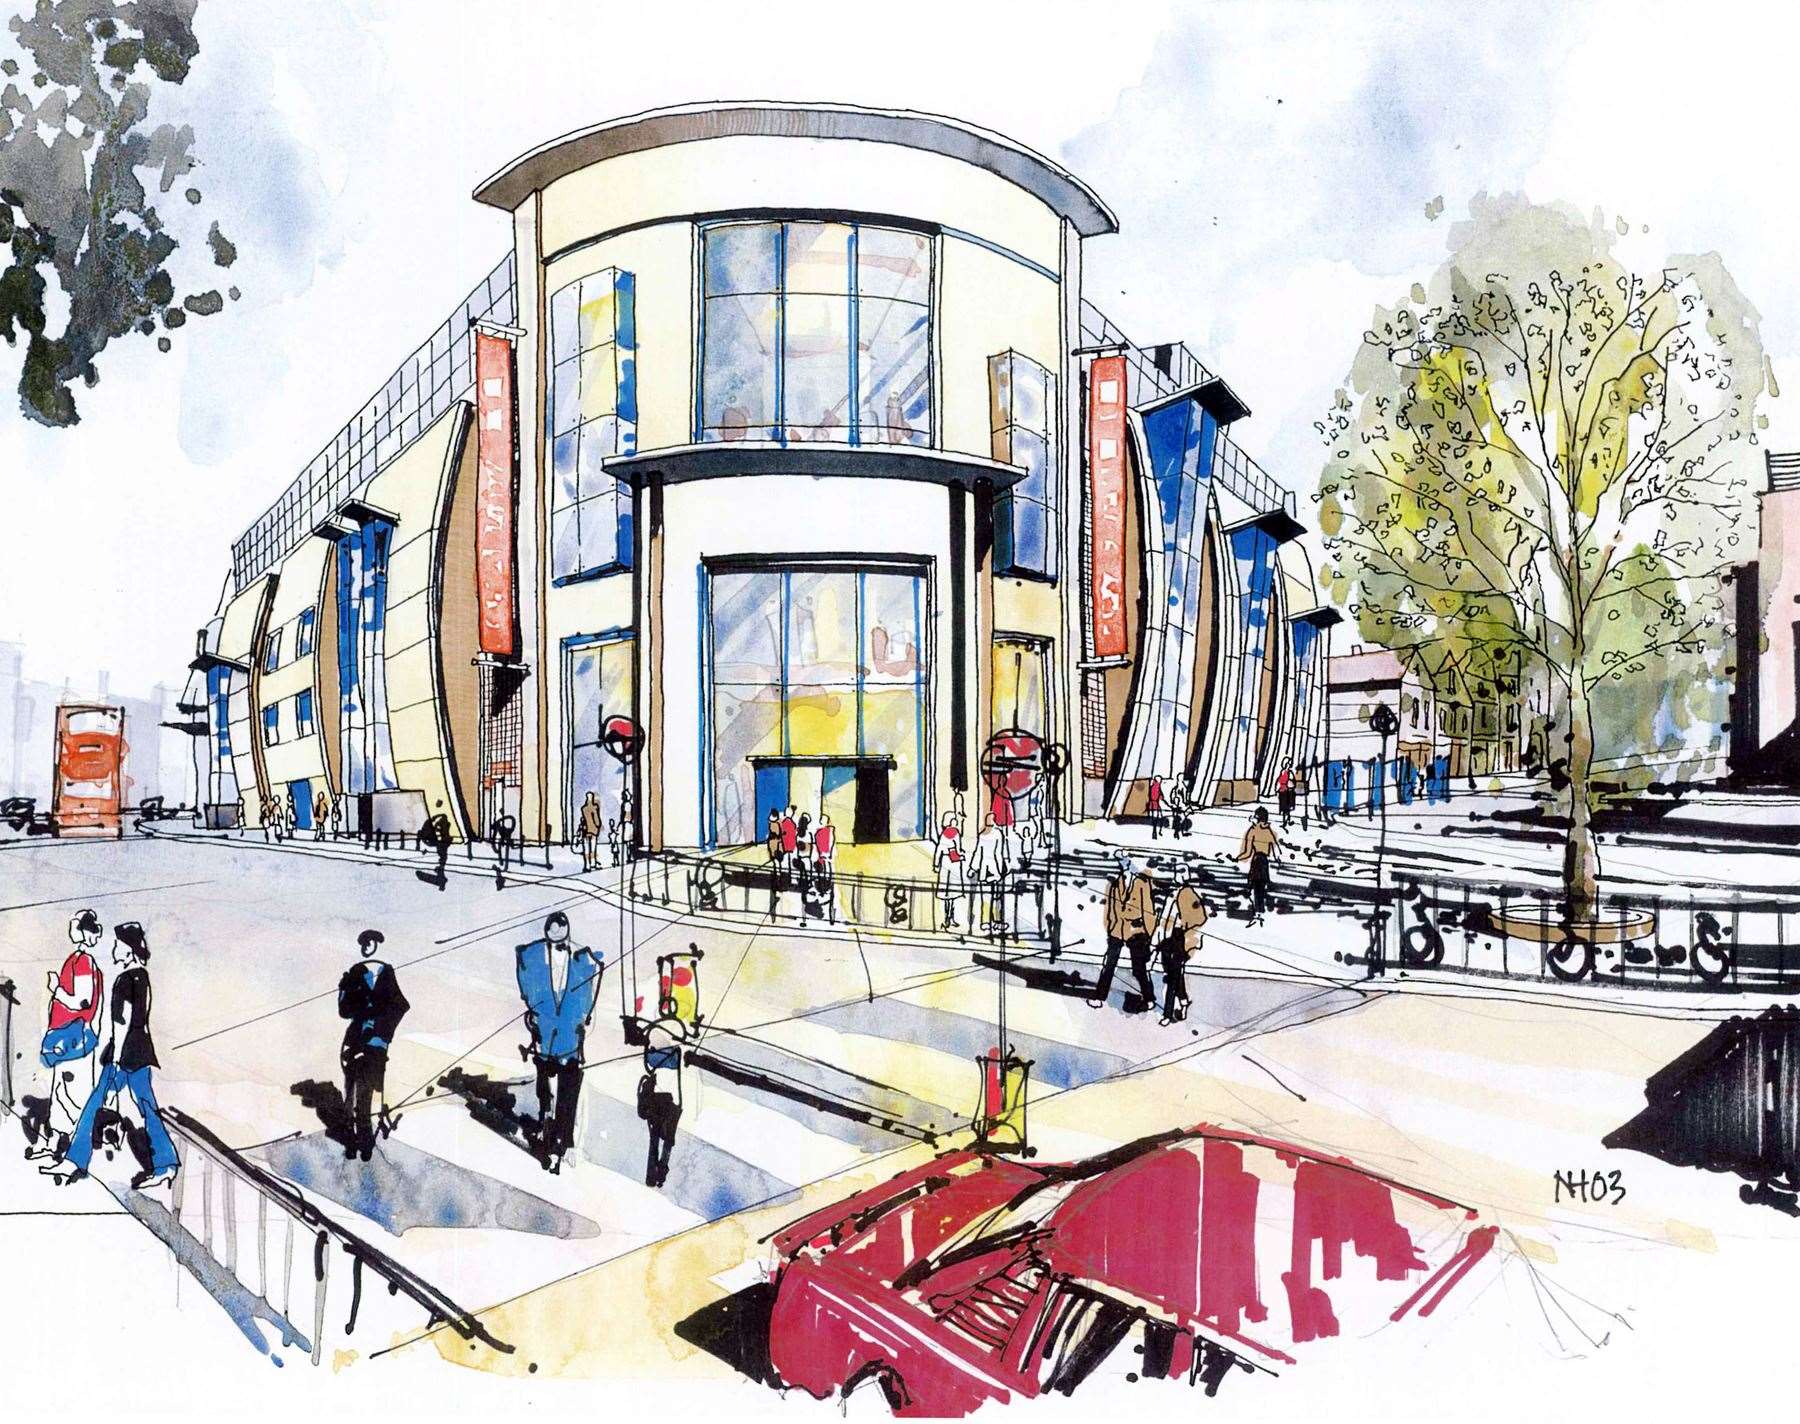 Developers released this artist's impression of the centre's extension in 2003